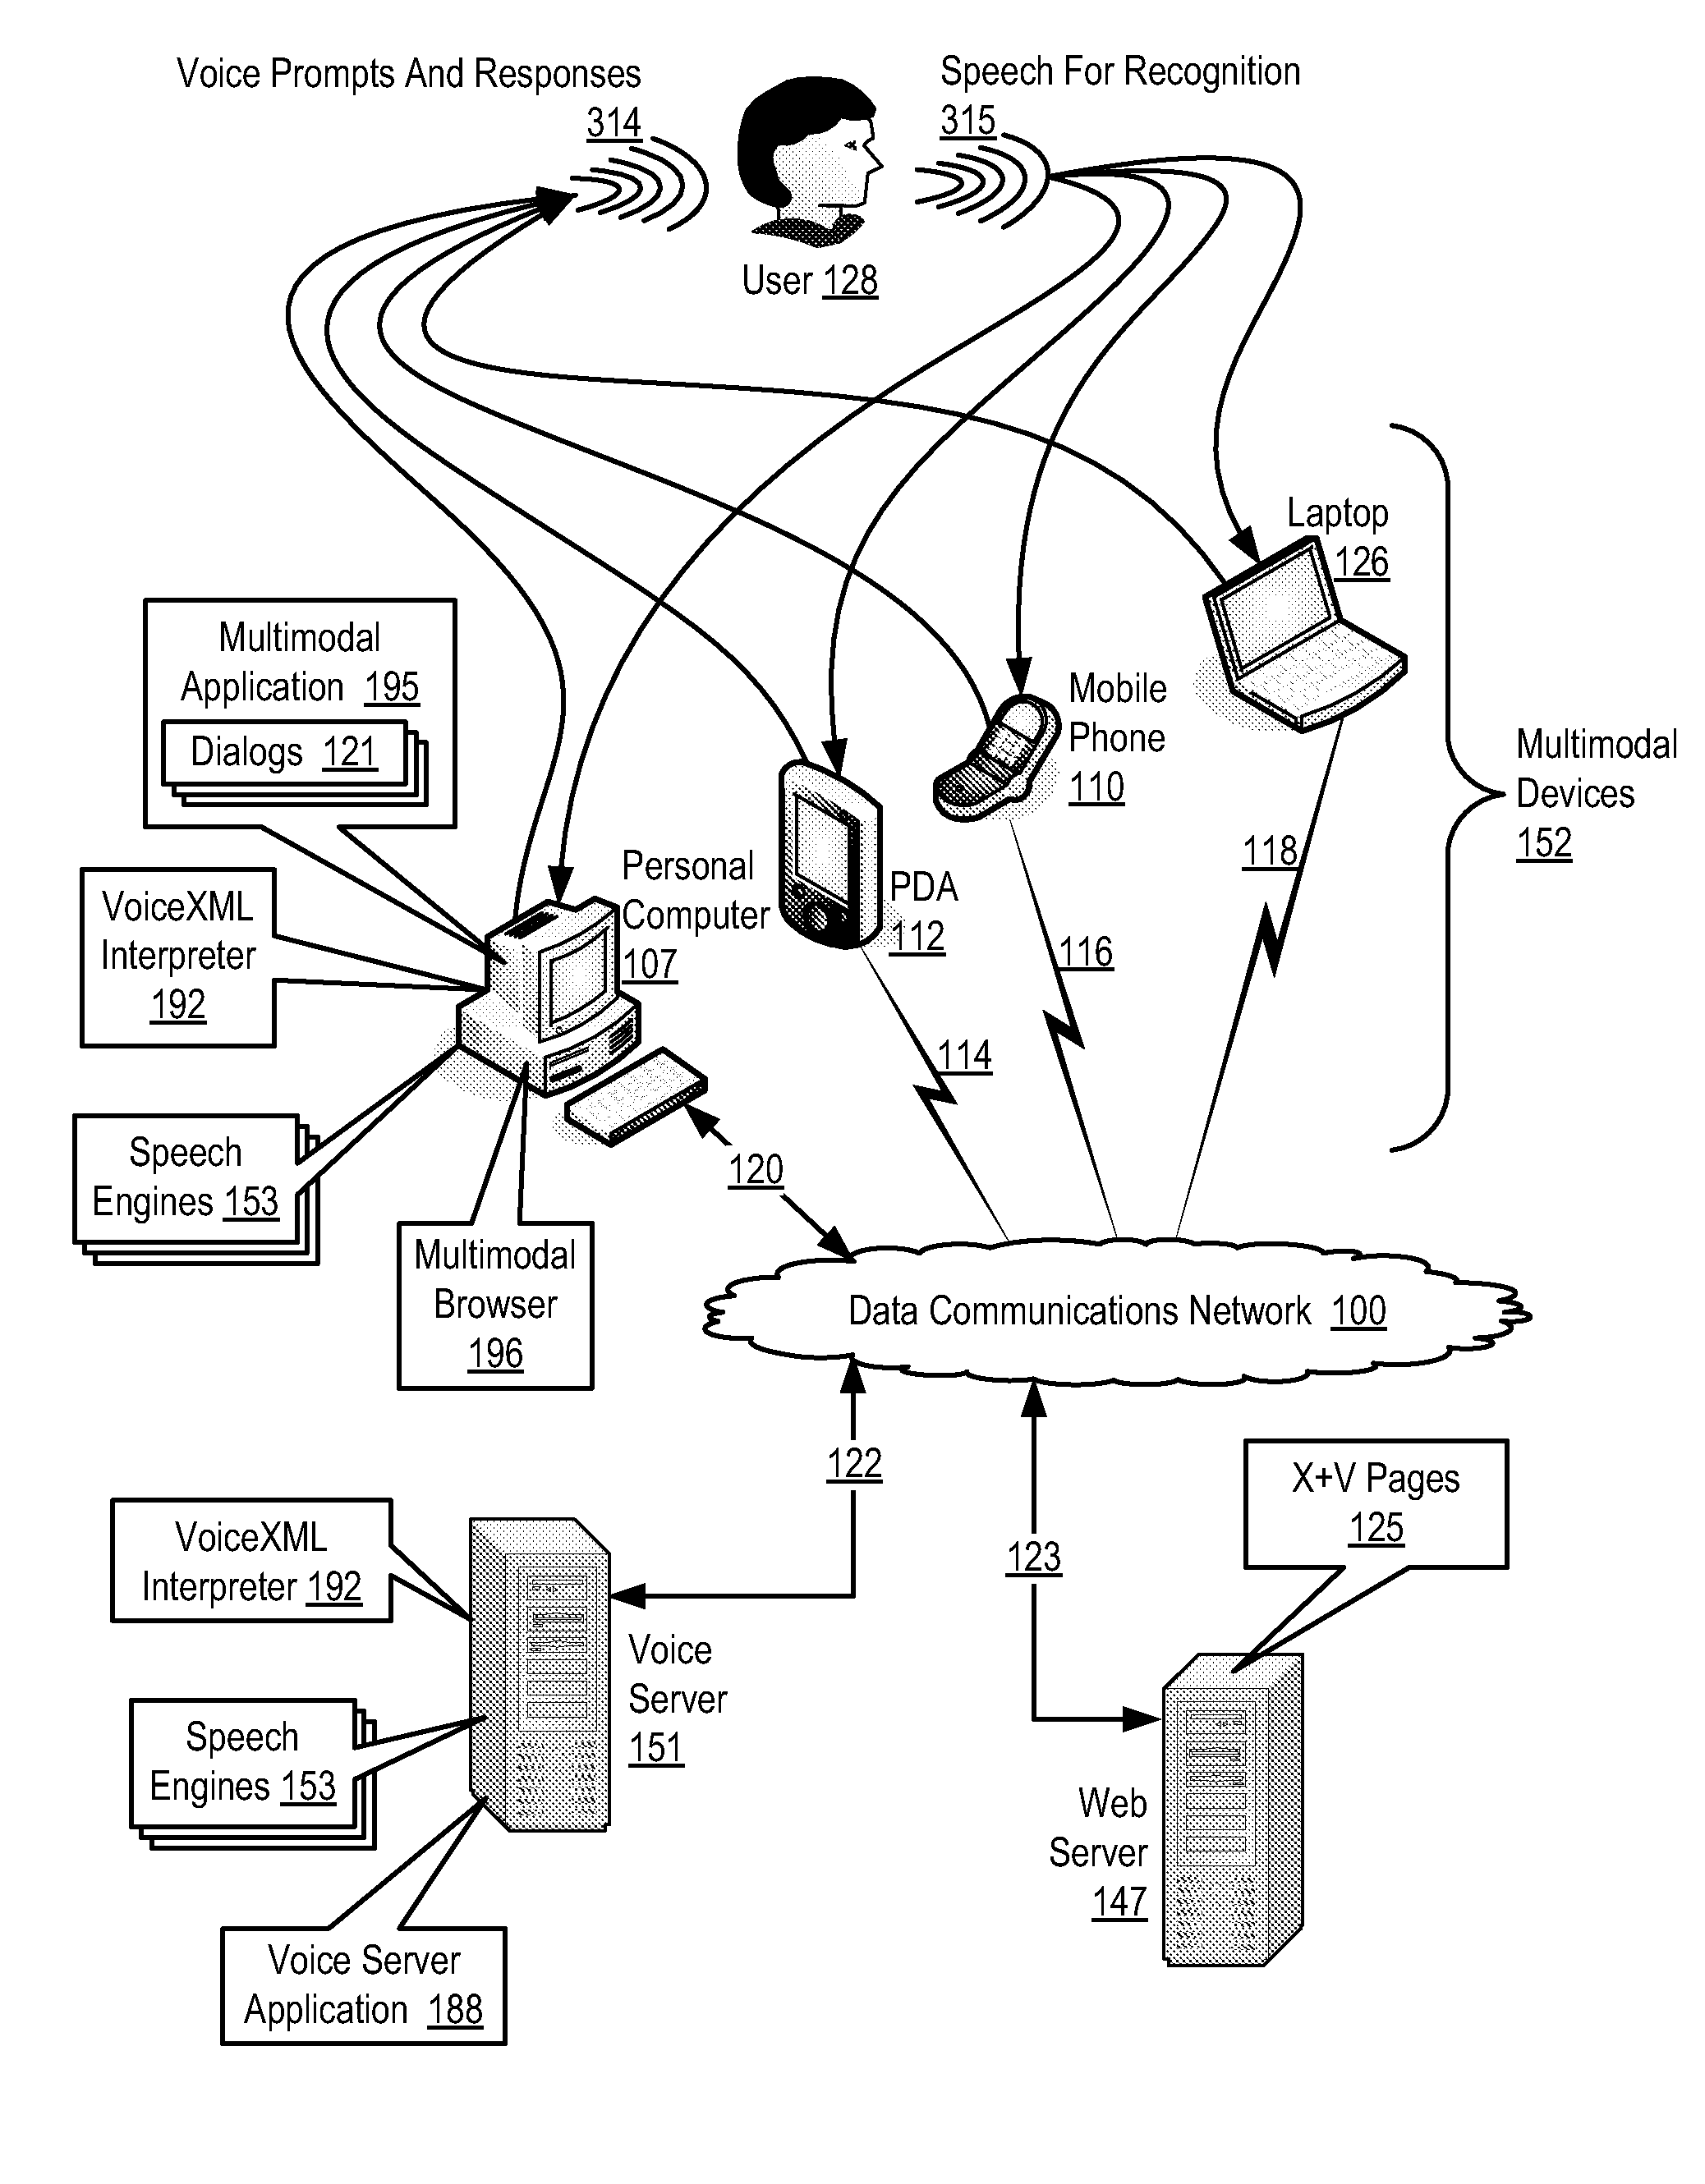 Supporting Multi-Lingual User Interaction With A Multimodal Application